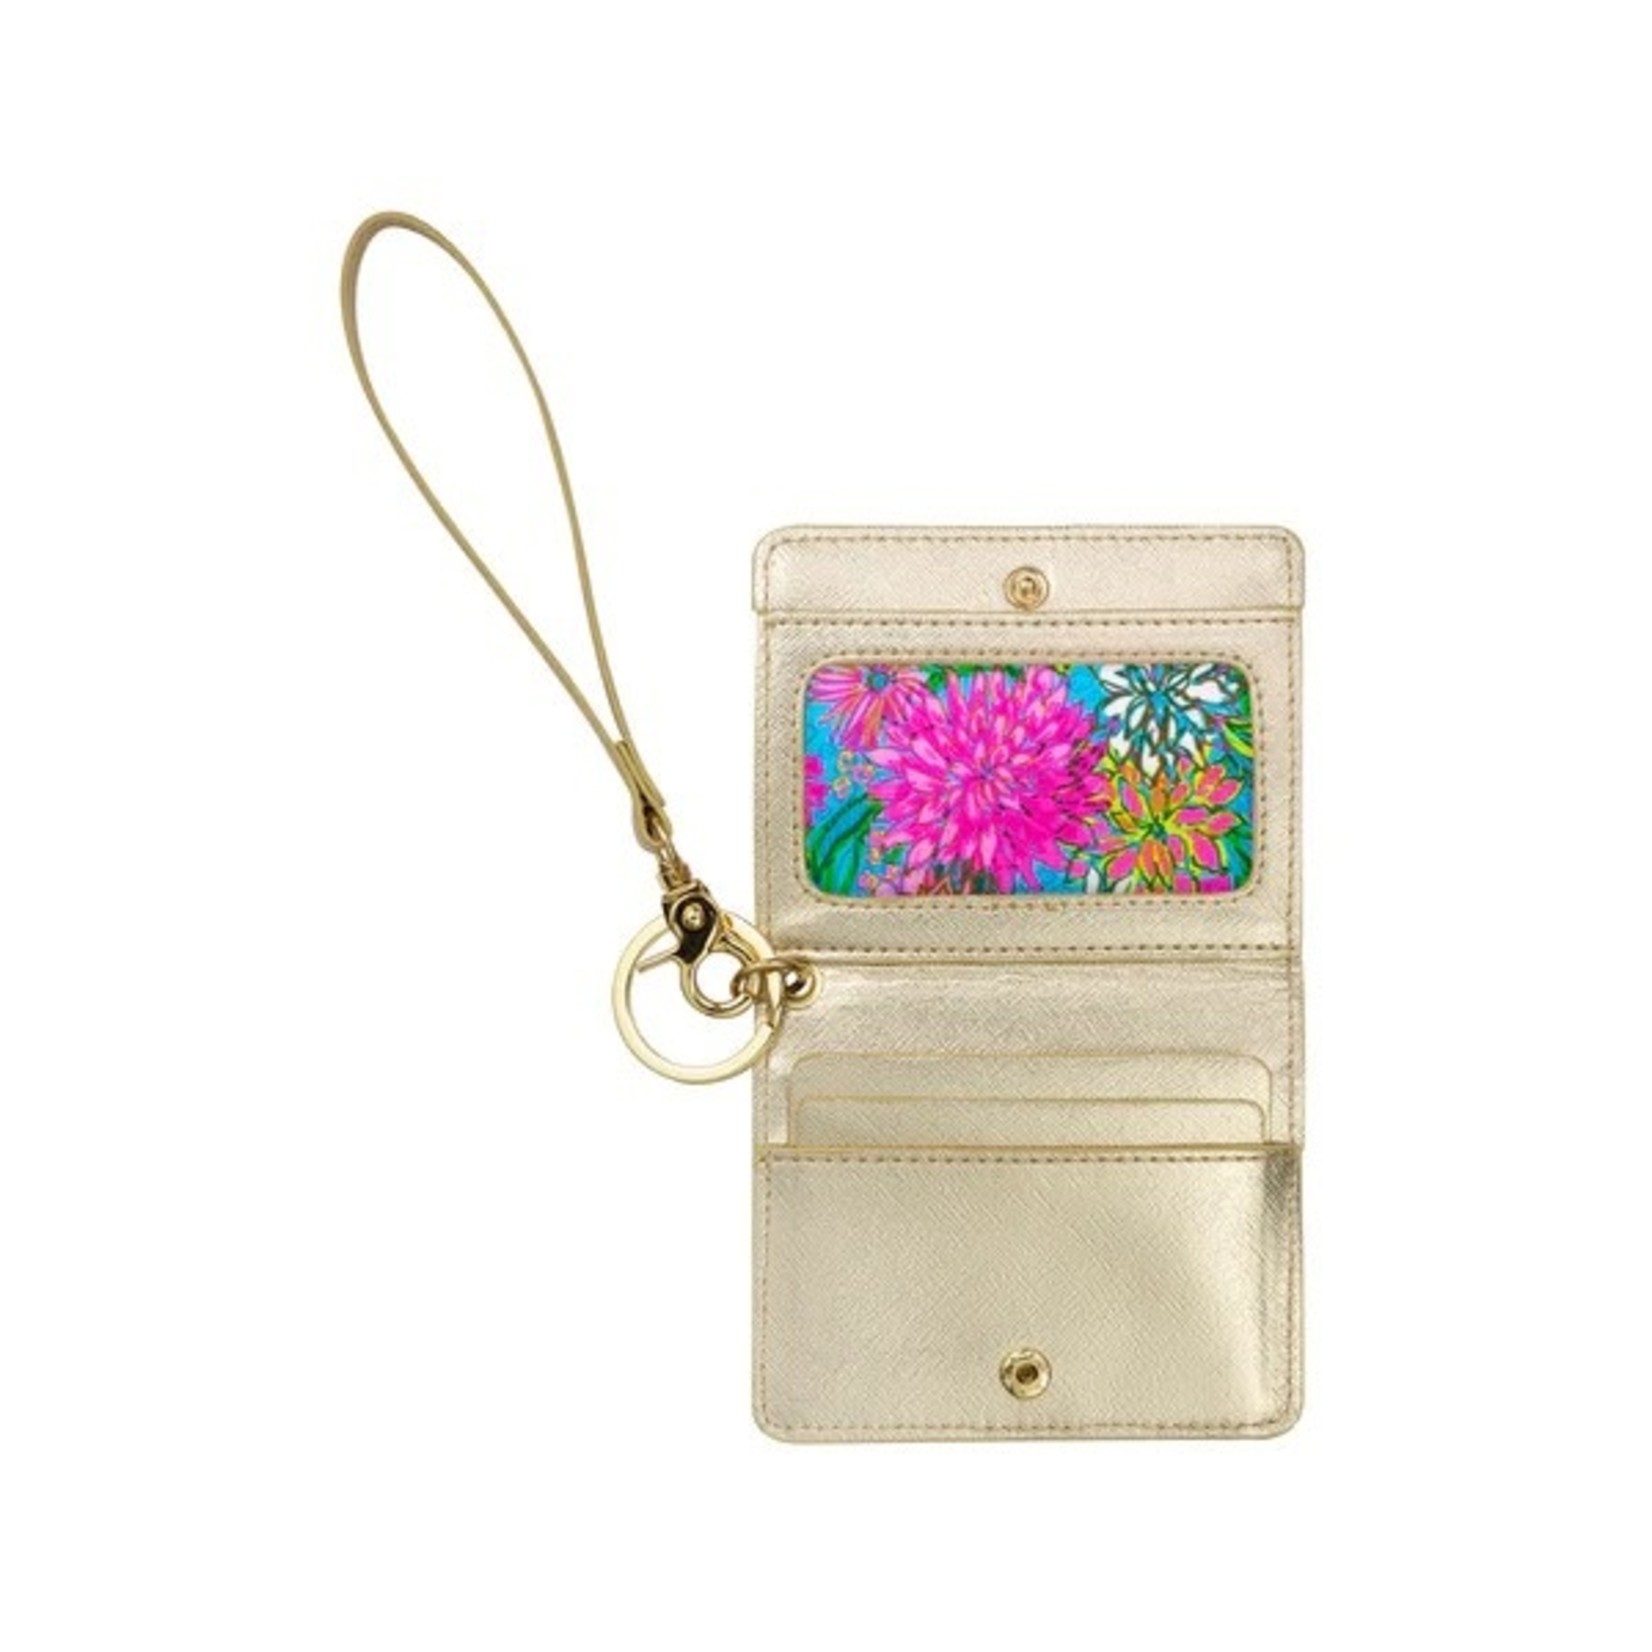 Lilly Pulitzer Walking on Sunshine Snap Card Case